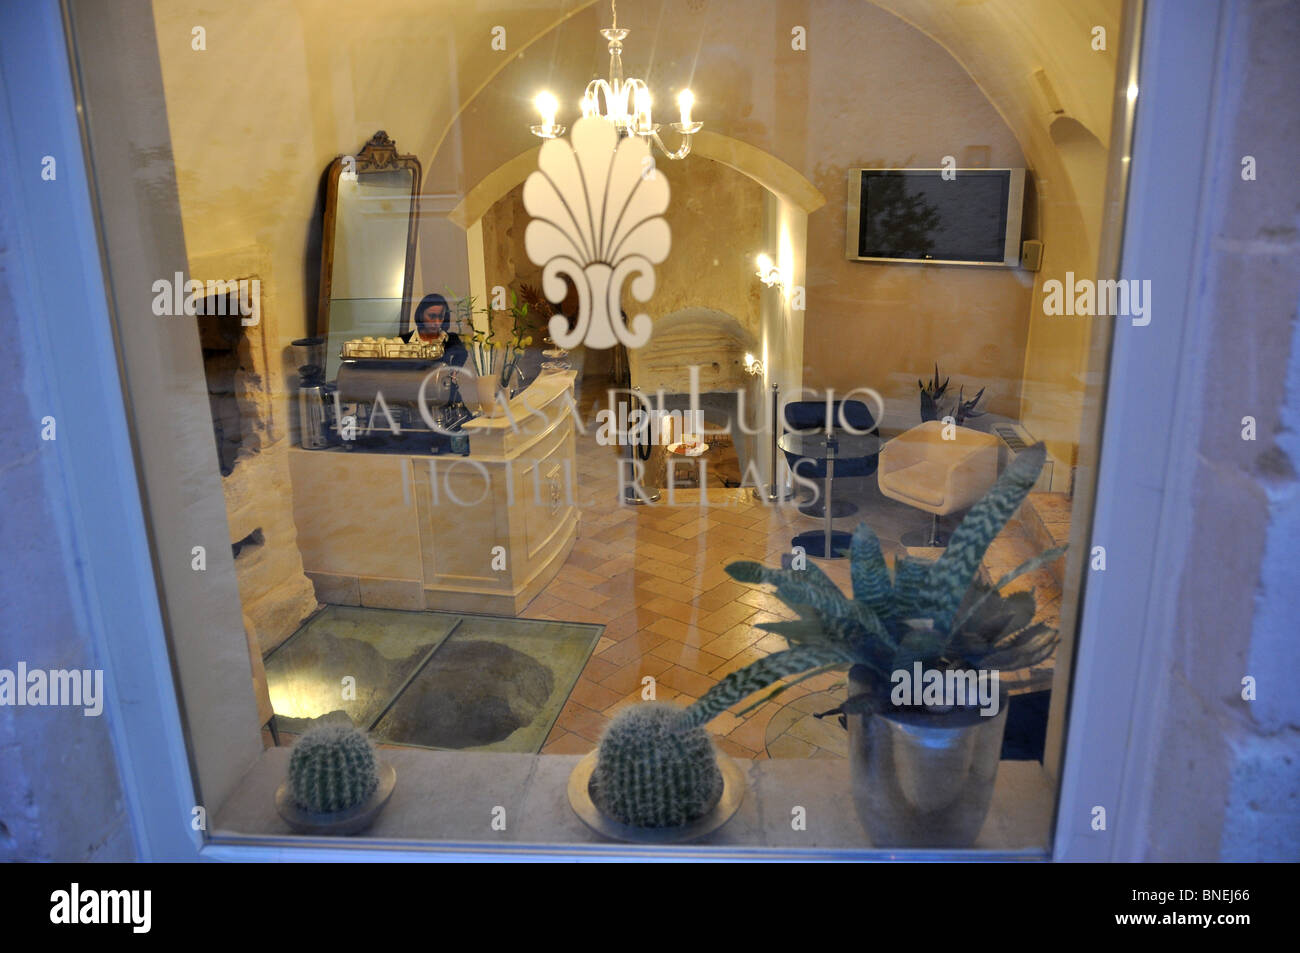 Hotel Reception-Sant Angolo recently created in a former cave dwelling of people and their animals Matera Sassi Basilacata Italy Stock Photo